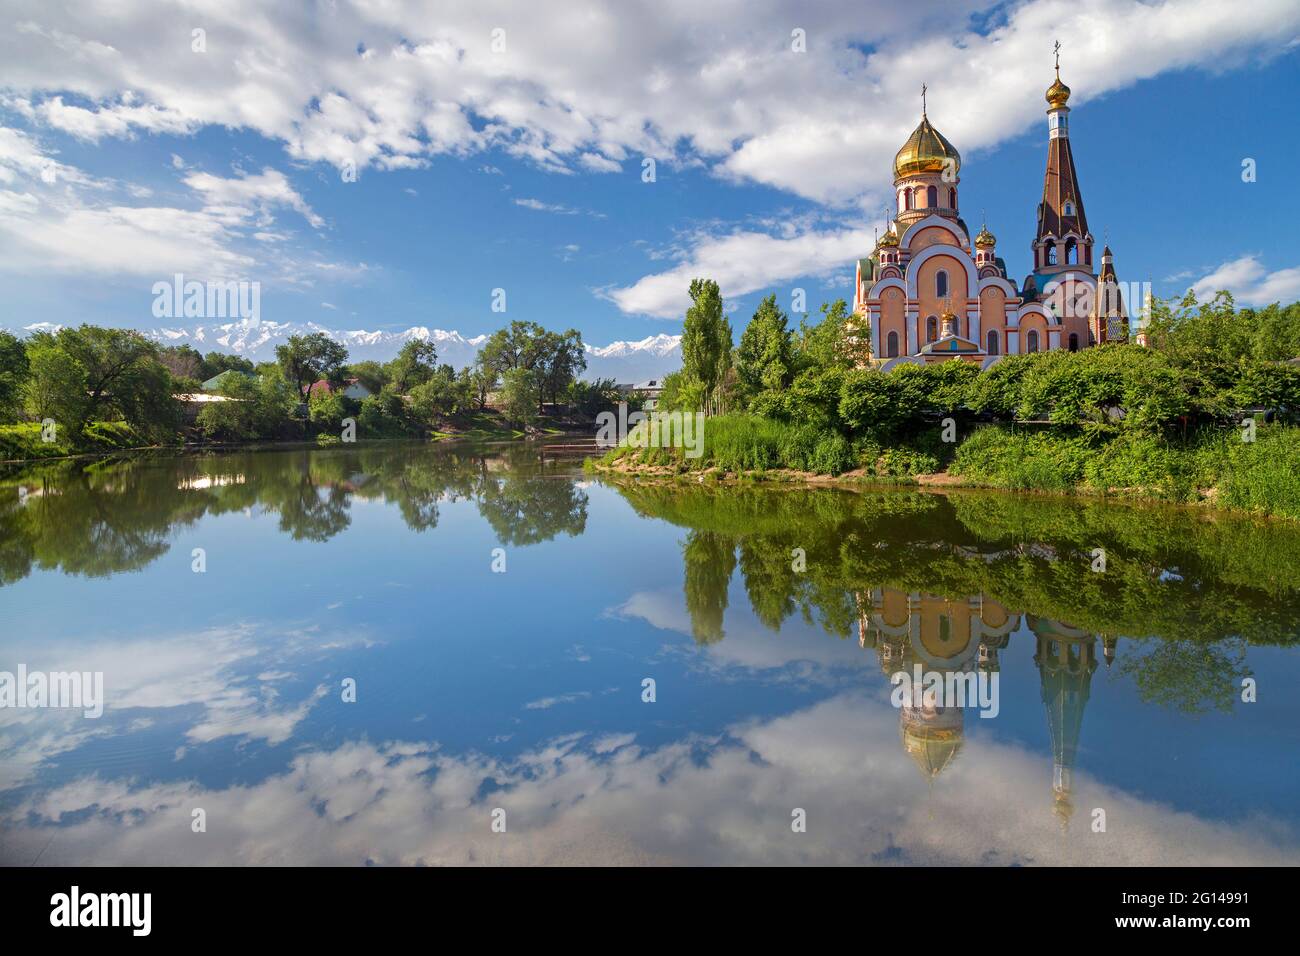 Russian orthodox church known as Church of exaltation of the holy cross and its reflection in Almaty, Kazakhstan Stock Photo